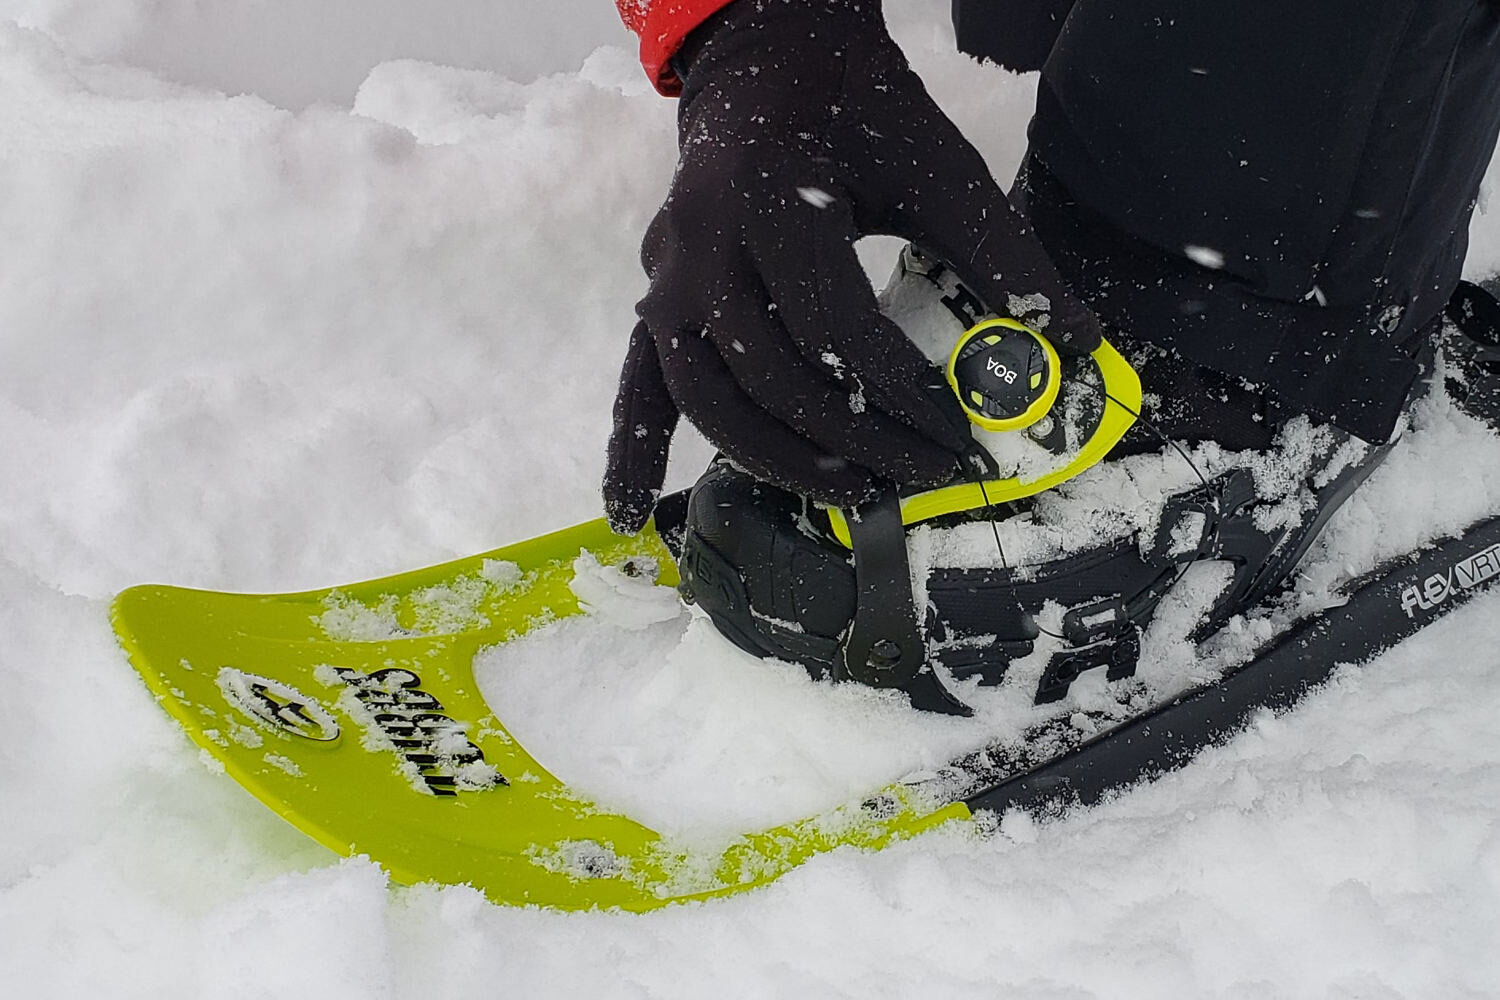 Lightweight liner gloves cover most of our needs on casual snowshoe trips unless conditions are really cold or wet.